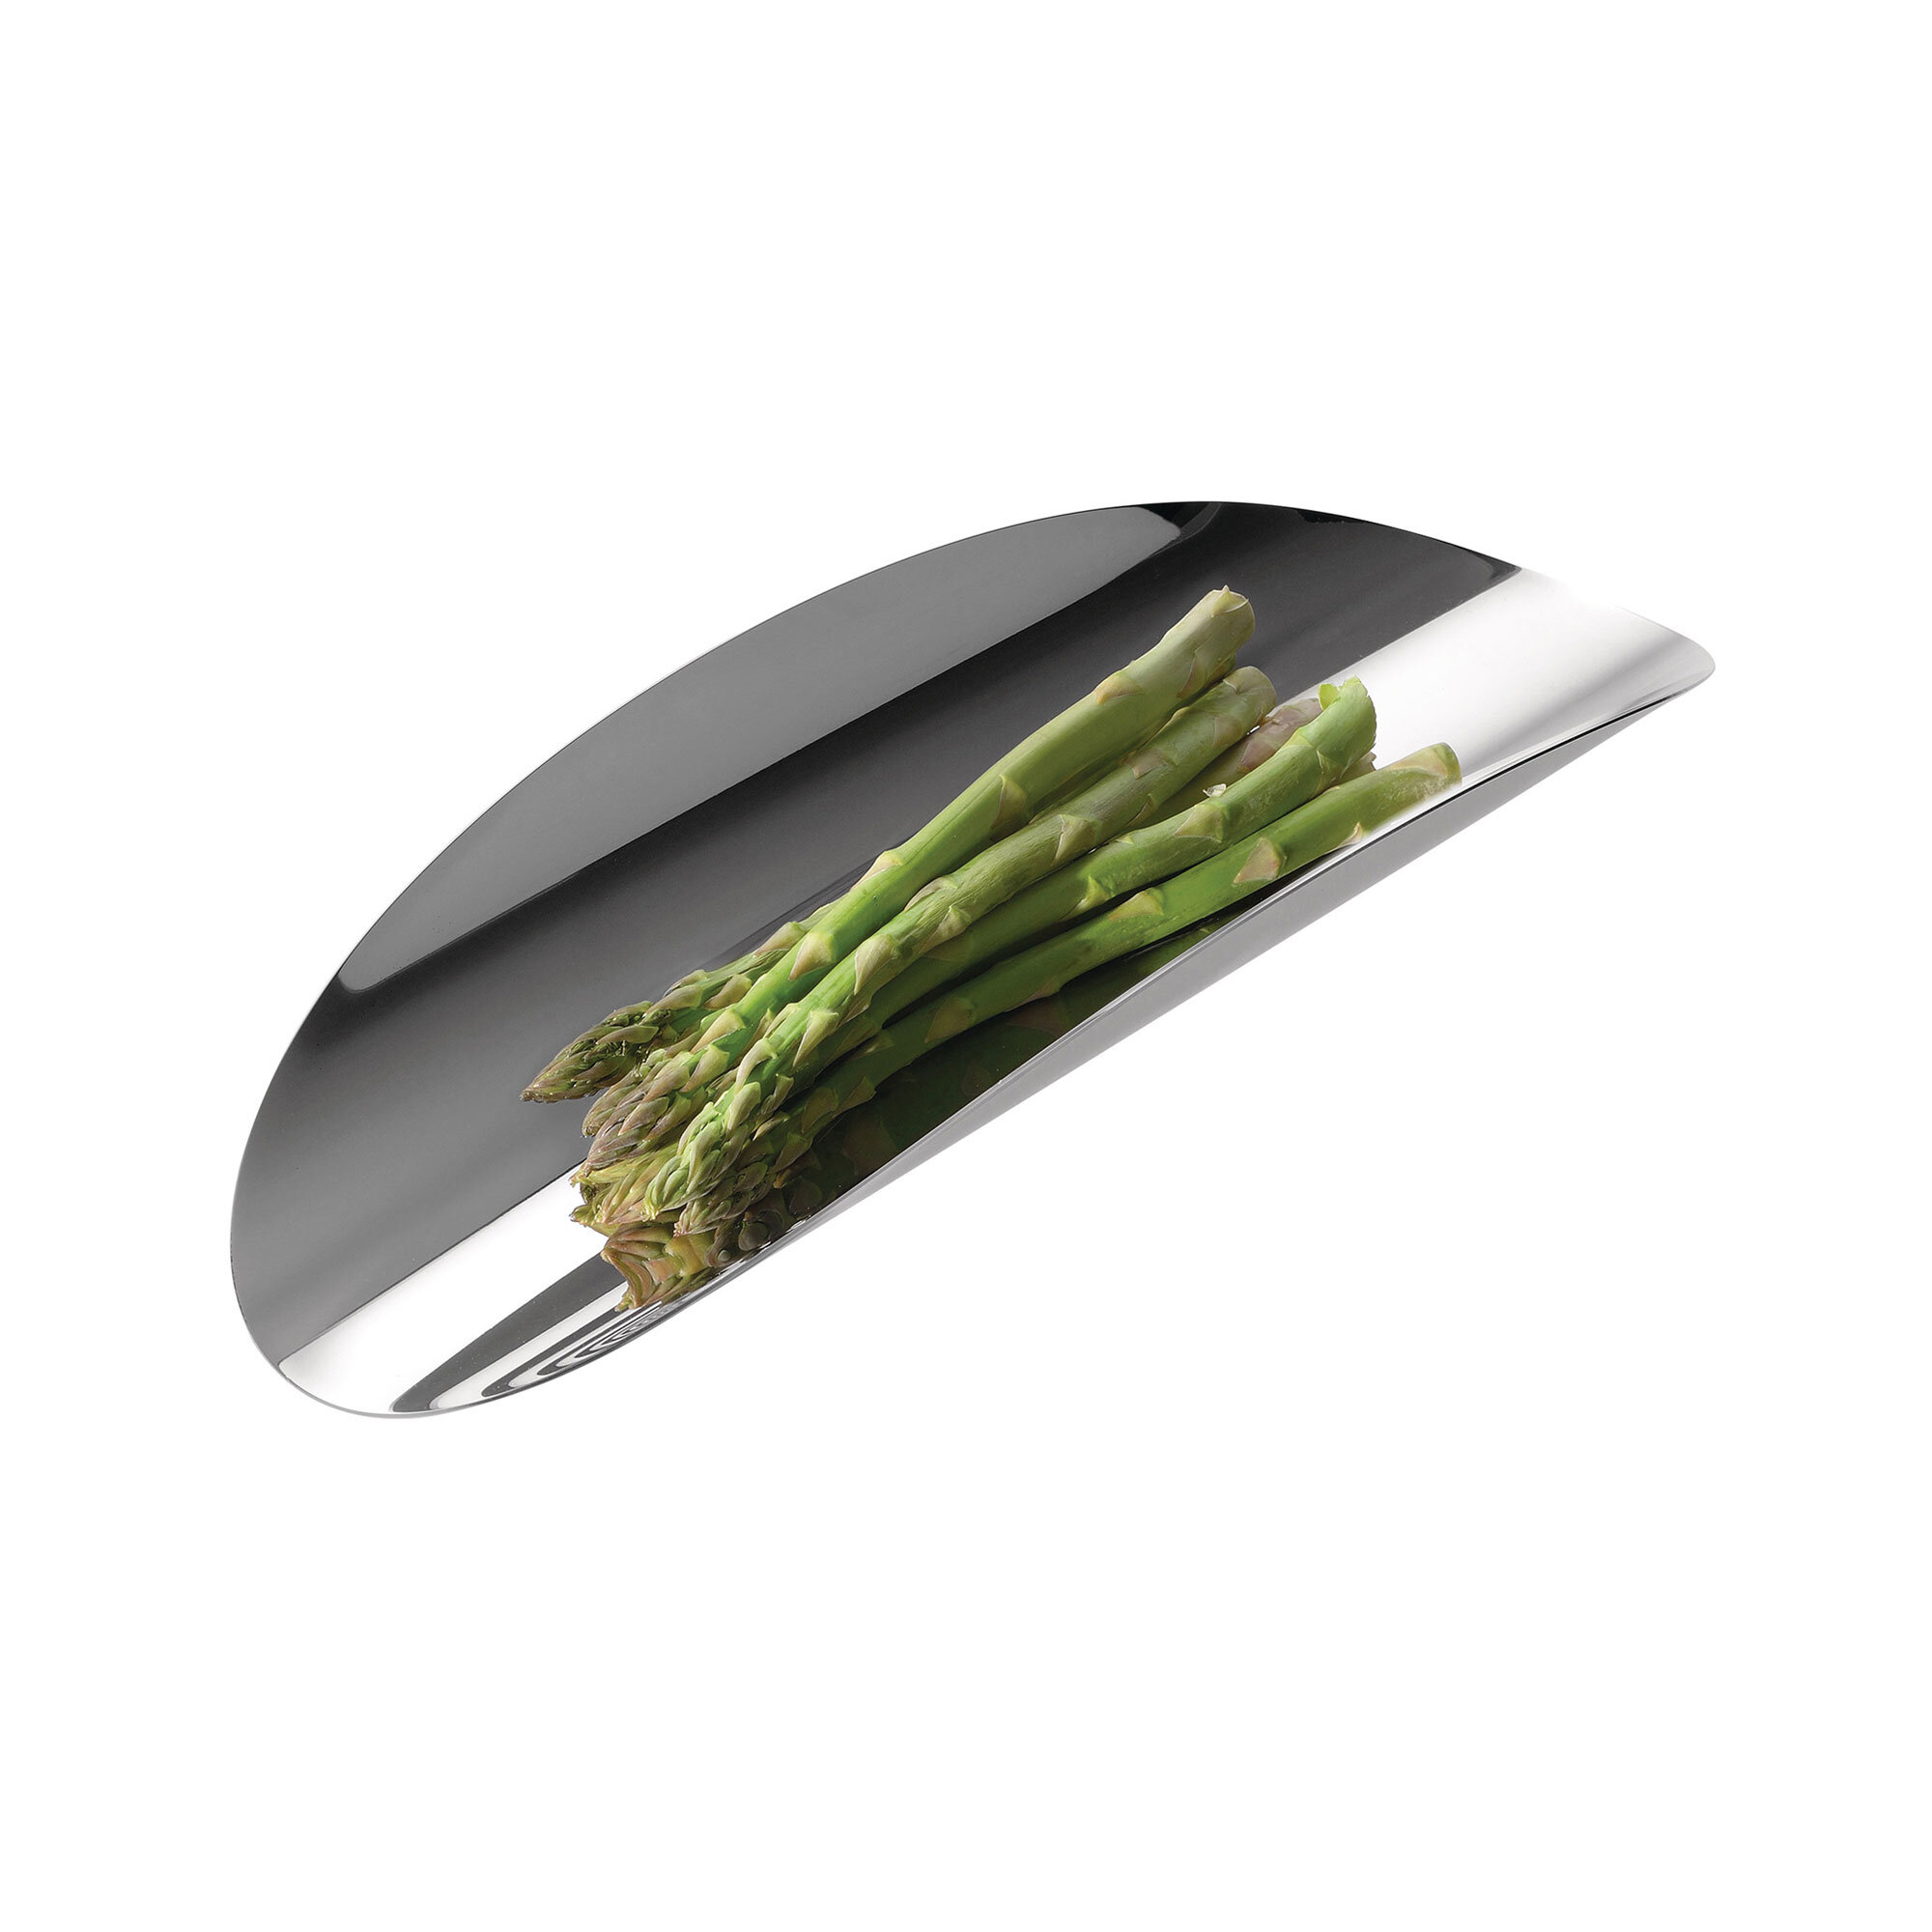 WEB_Abi-Alice--Ellipse-for-Alessi_stainless-steel-with-Asparagus_2000Pxl_RGB.jpg